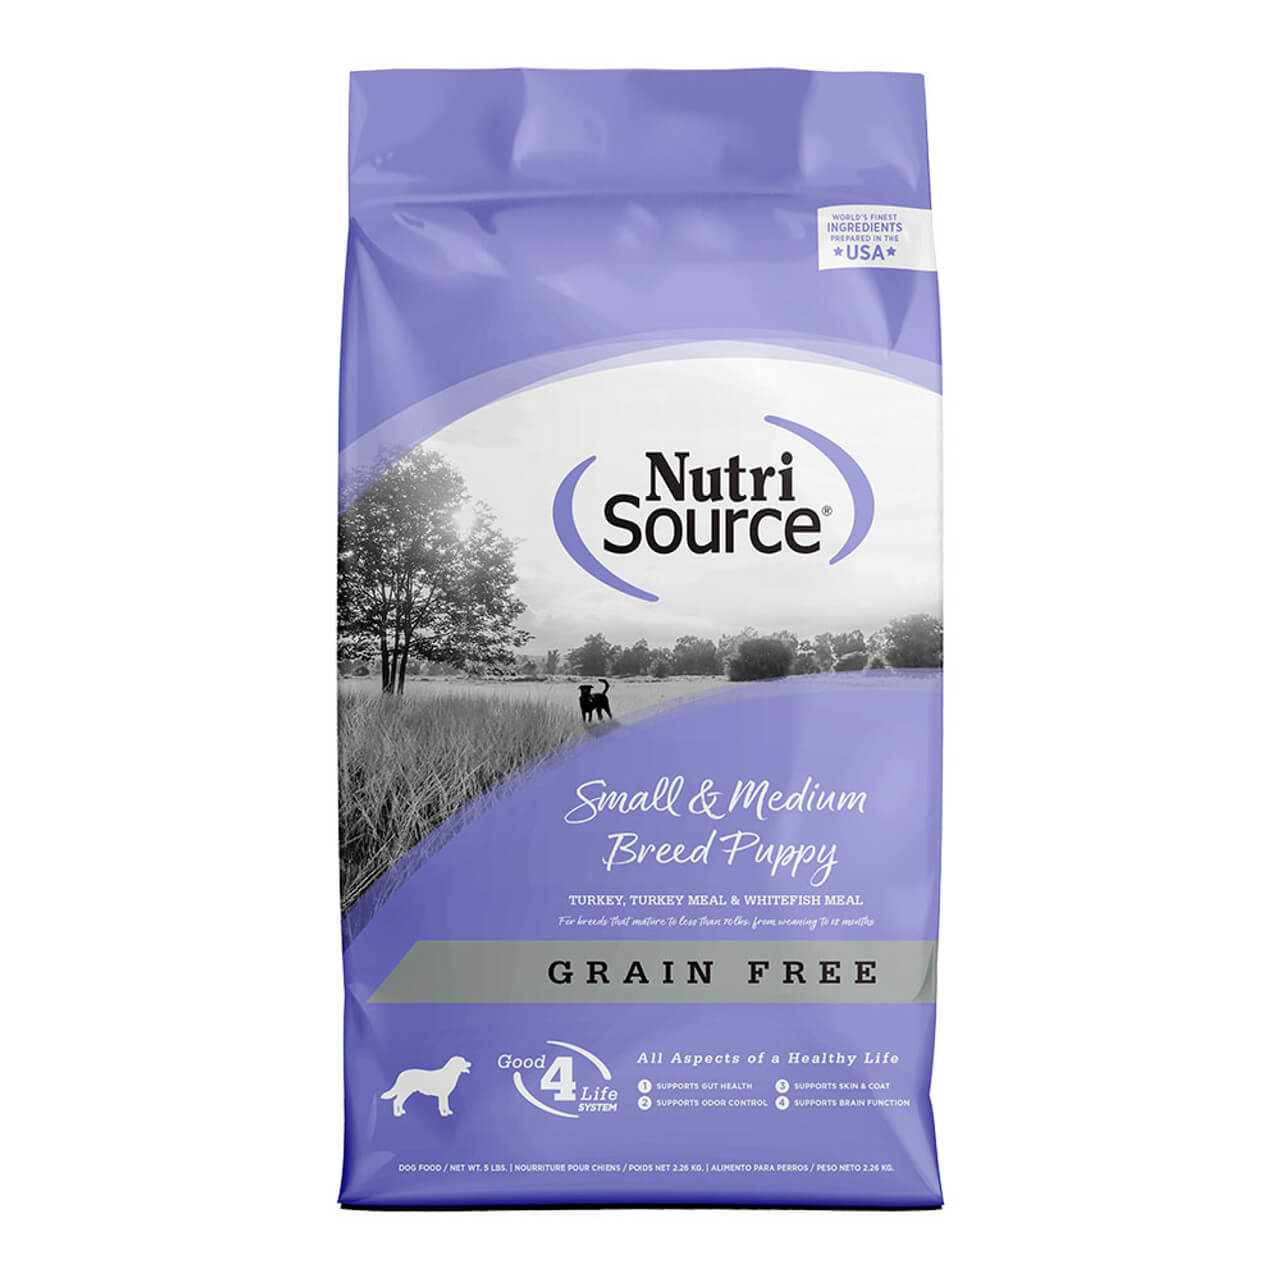 Where Is Nutrisource Dog Food Made?